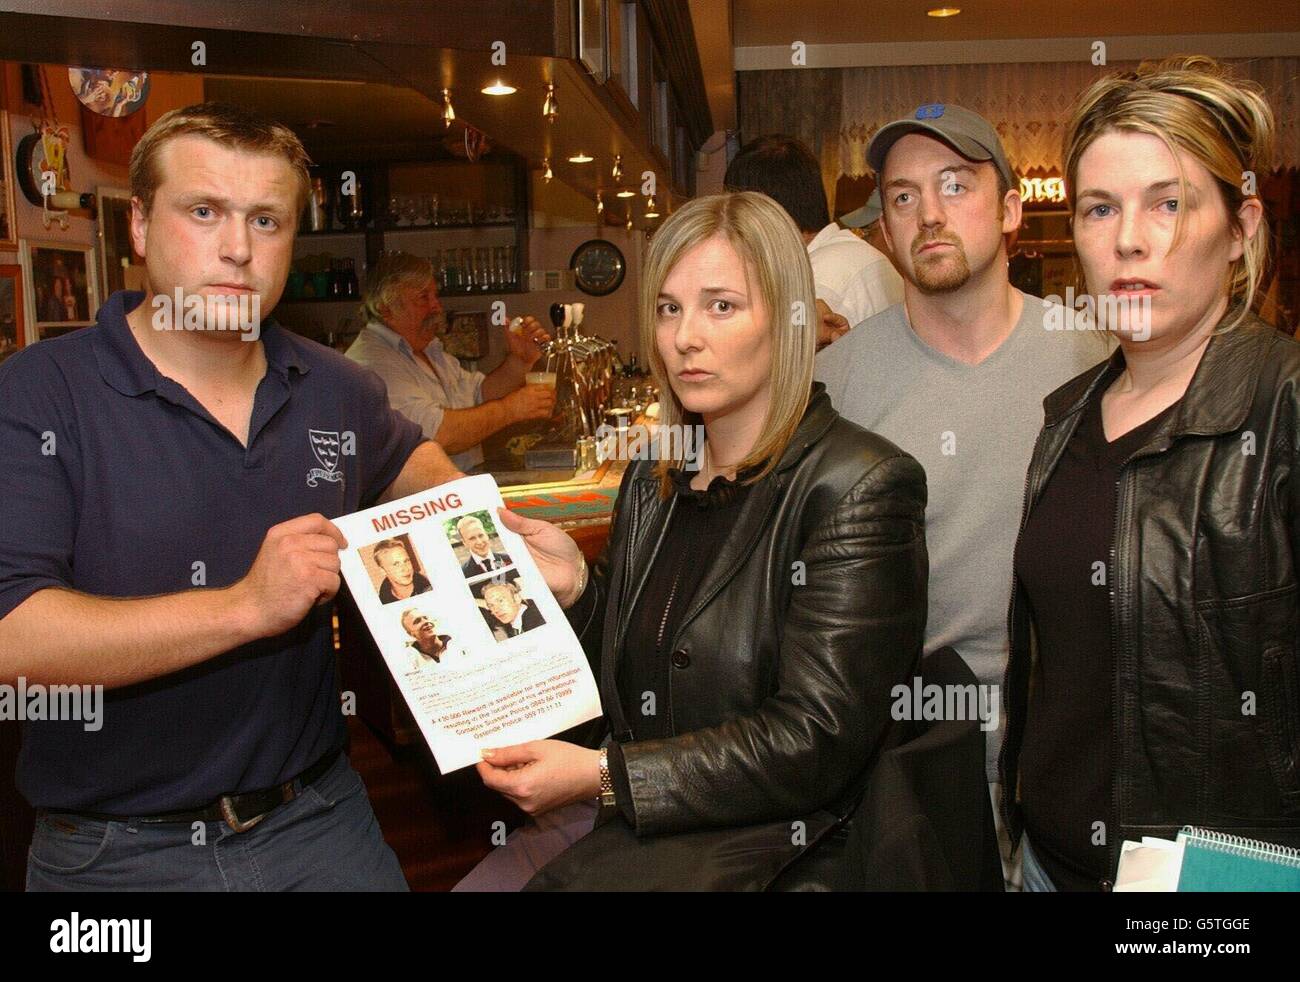 L-R David Groombridge, Charlotte Gilbert, from Crowborough , West Sussex, Dan Martin and Sarah Browell holds an appeal poster of Charlotte's husband, Ian, at the Bar Bristol, in Oostende, Belgium, in the early hours of the morning. * Ian Gilbert has been missing for a fortnight, since he disappeared from a stag party in Oostende. Charlotte and friends are visiting bars in Oostende to jog memories in the hope of finding him. Stock Photo